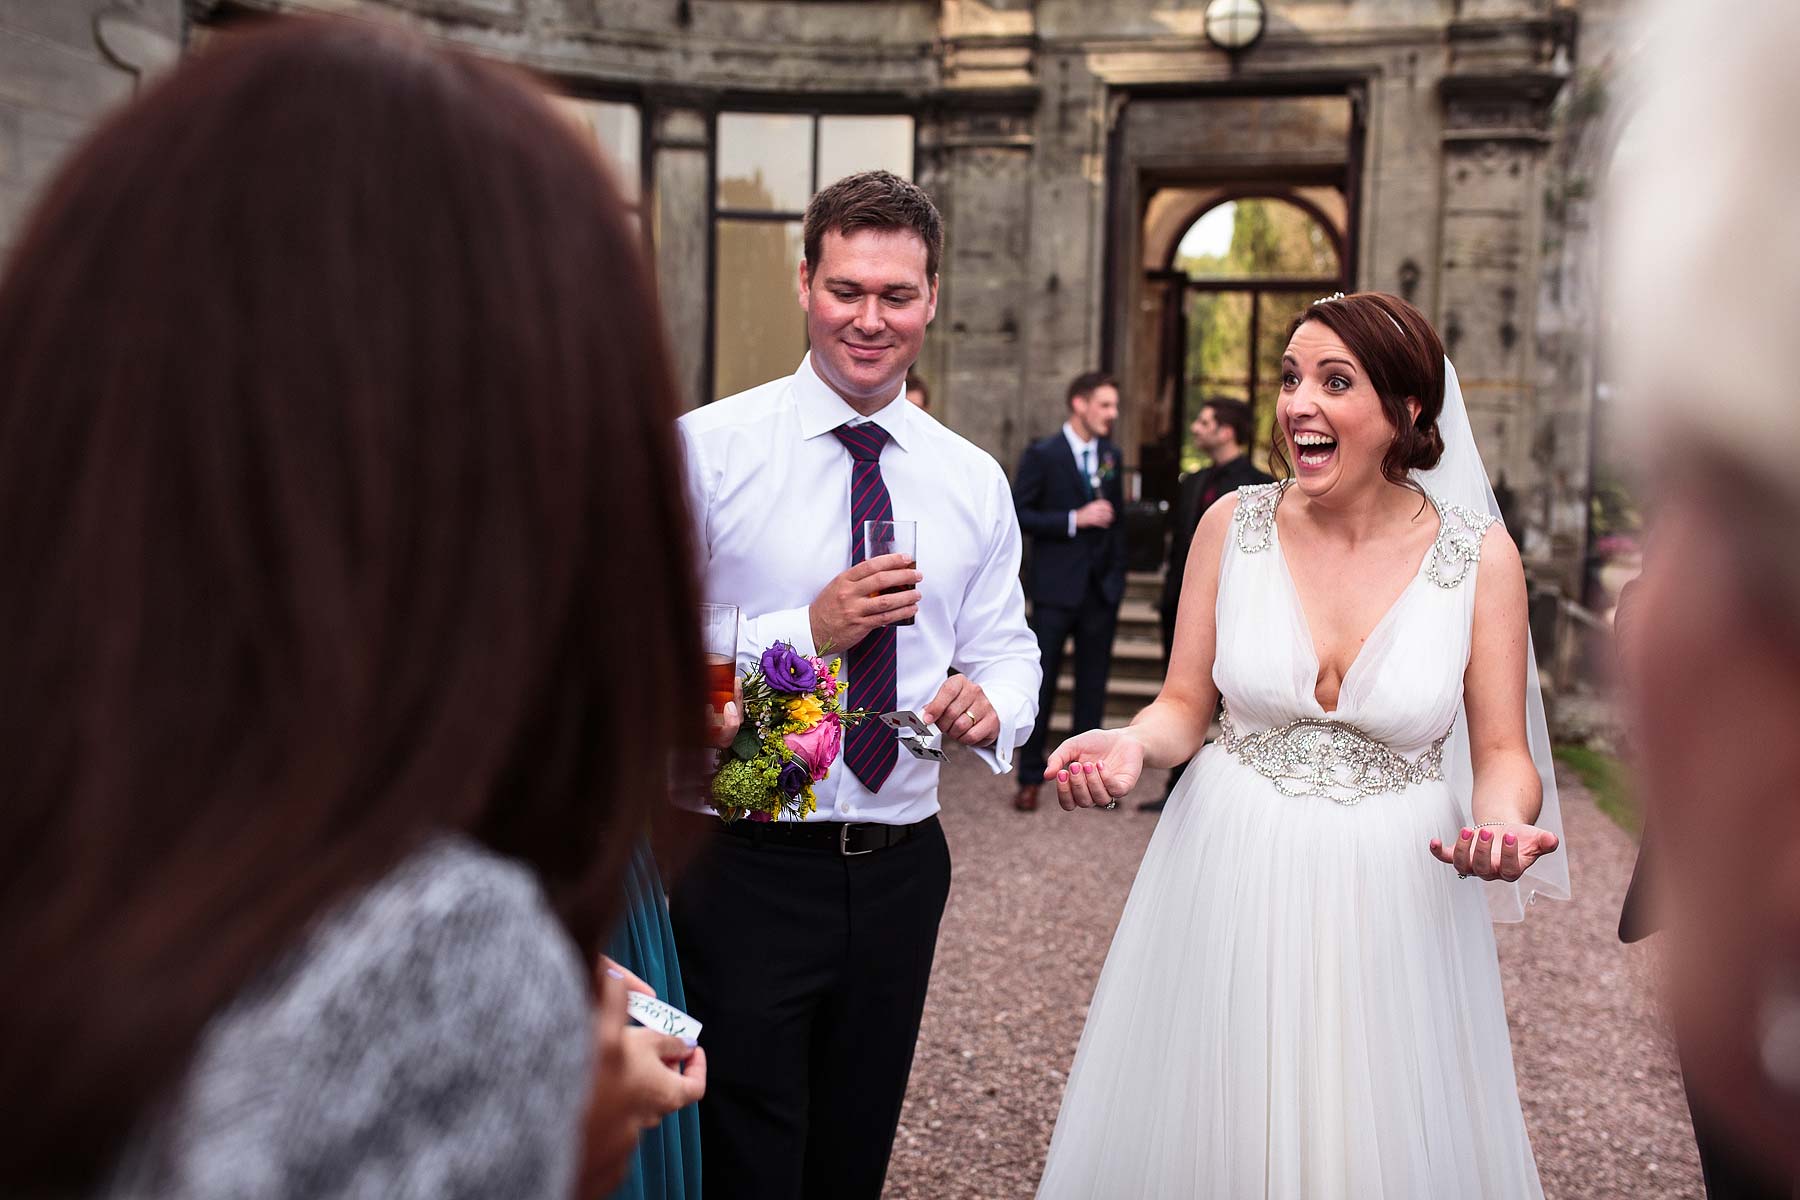 Bride and Groom being entertained by close magician during drinks reception of Sandon Hall in Stafford by Stafford Documentary Wedding Photographer Stuart James